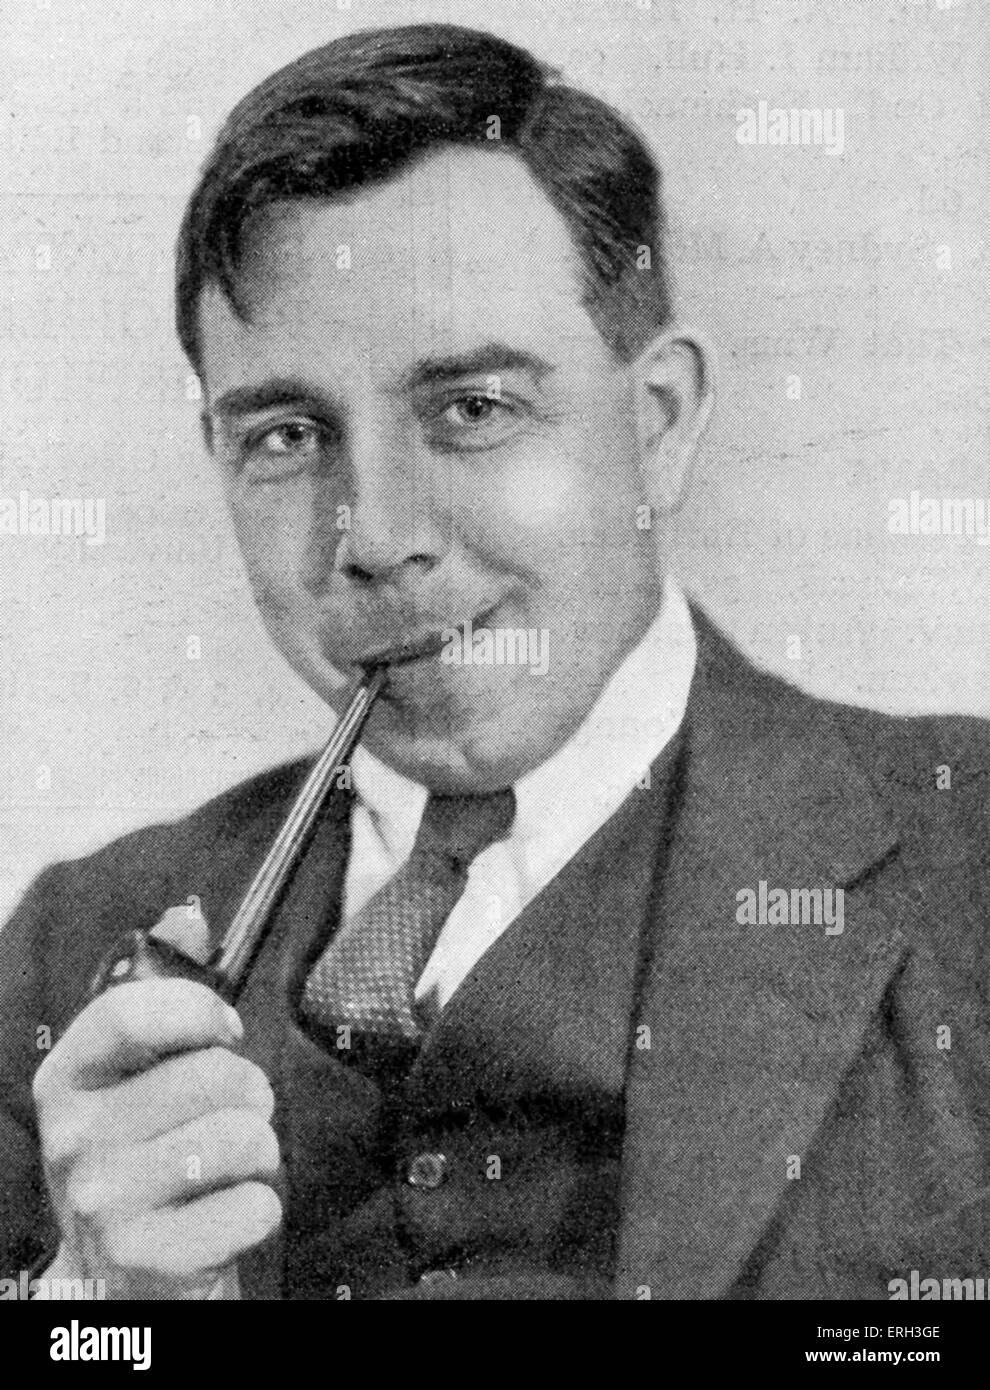 J. B. Priestley, English writer and broadcaster, 13 September 1894 – 14 August 1984. Portrait photograph by Howard Coster. Stock Photo